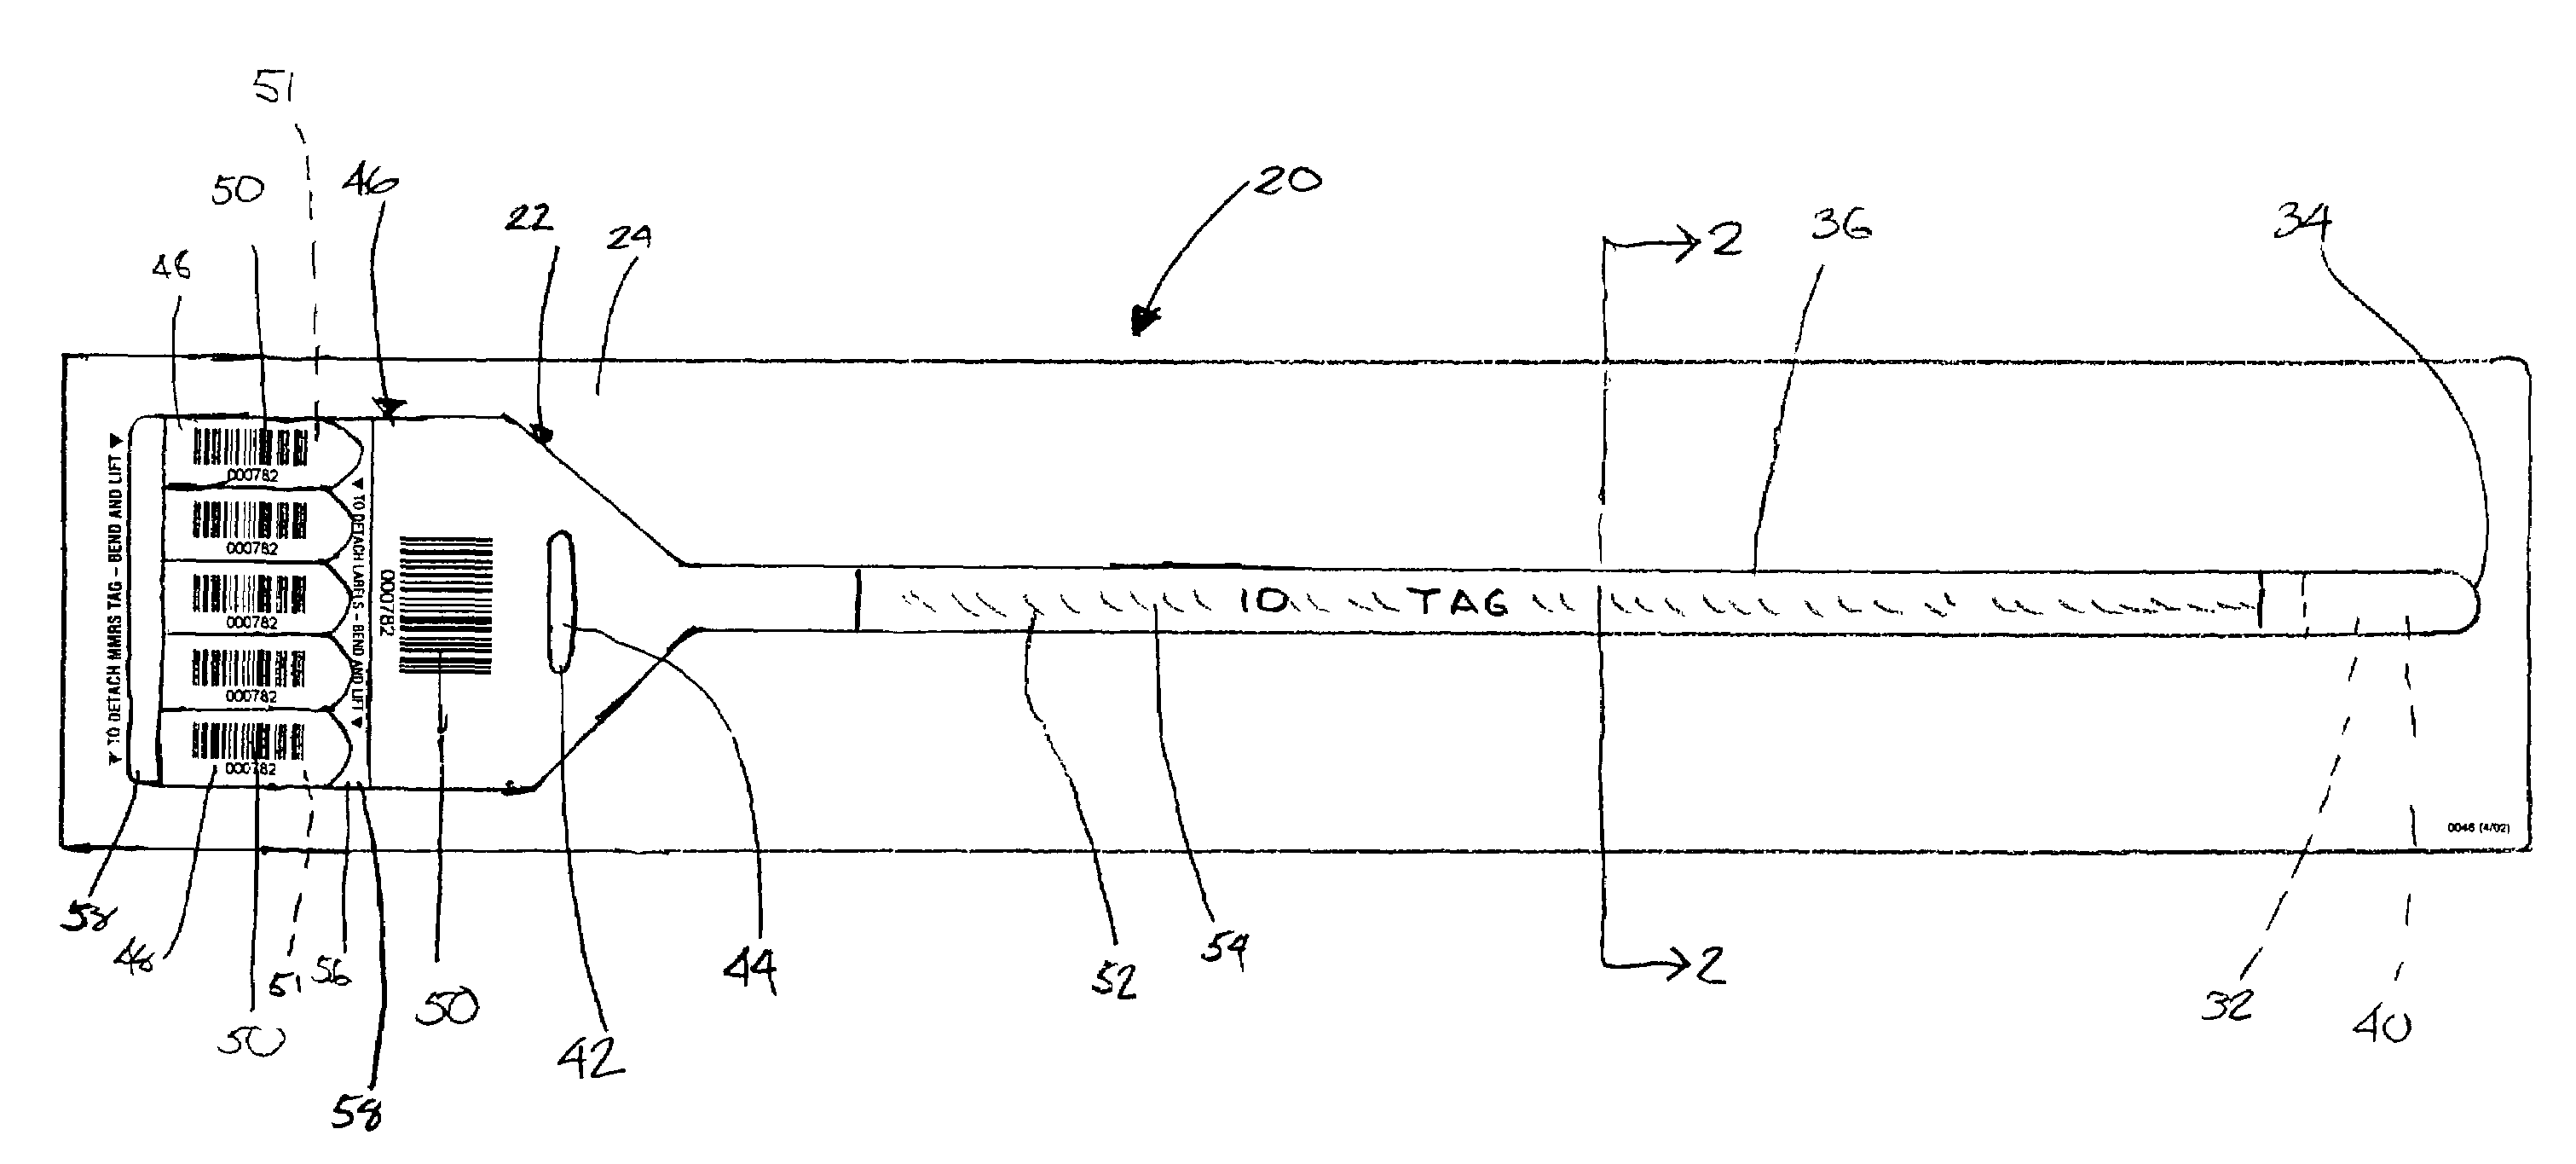 Wristband/label assembly business form and method